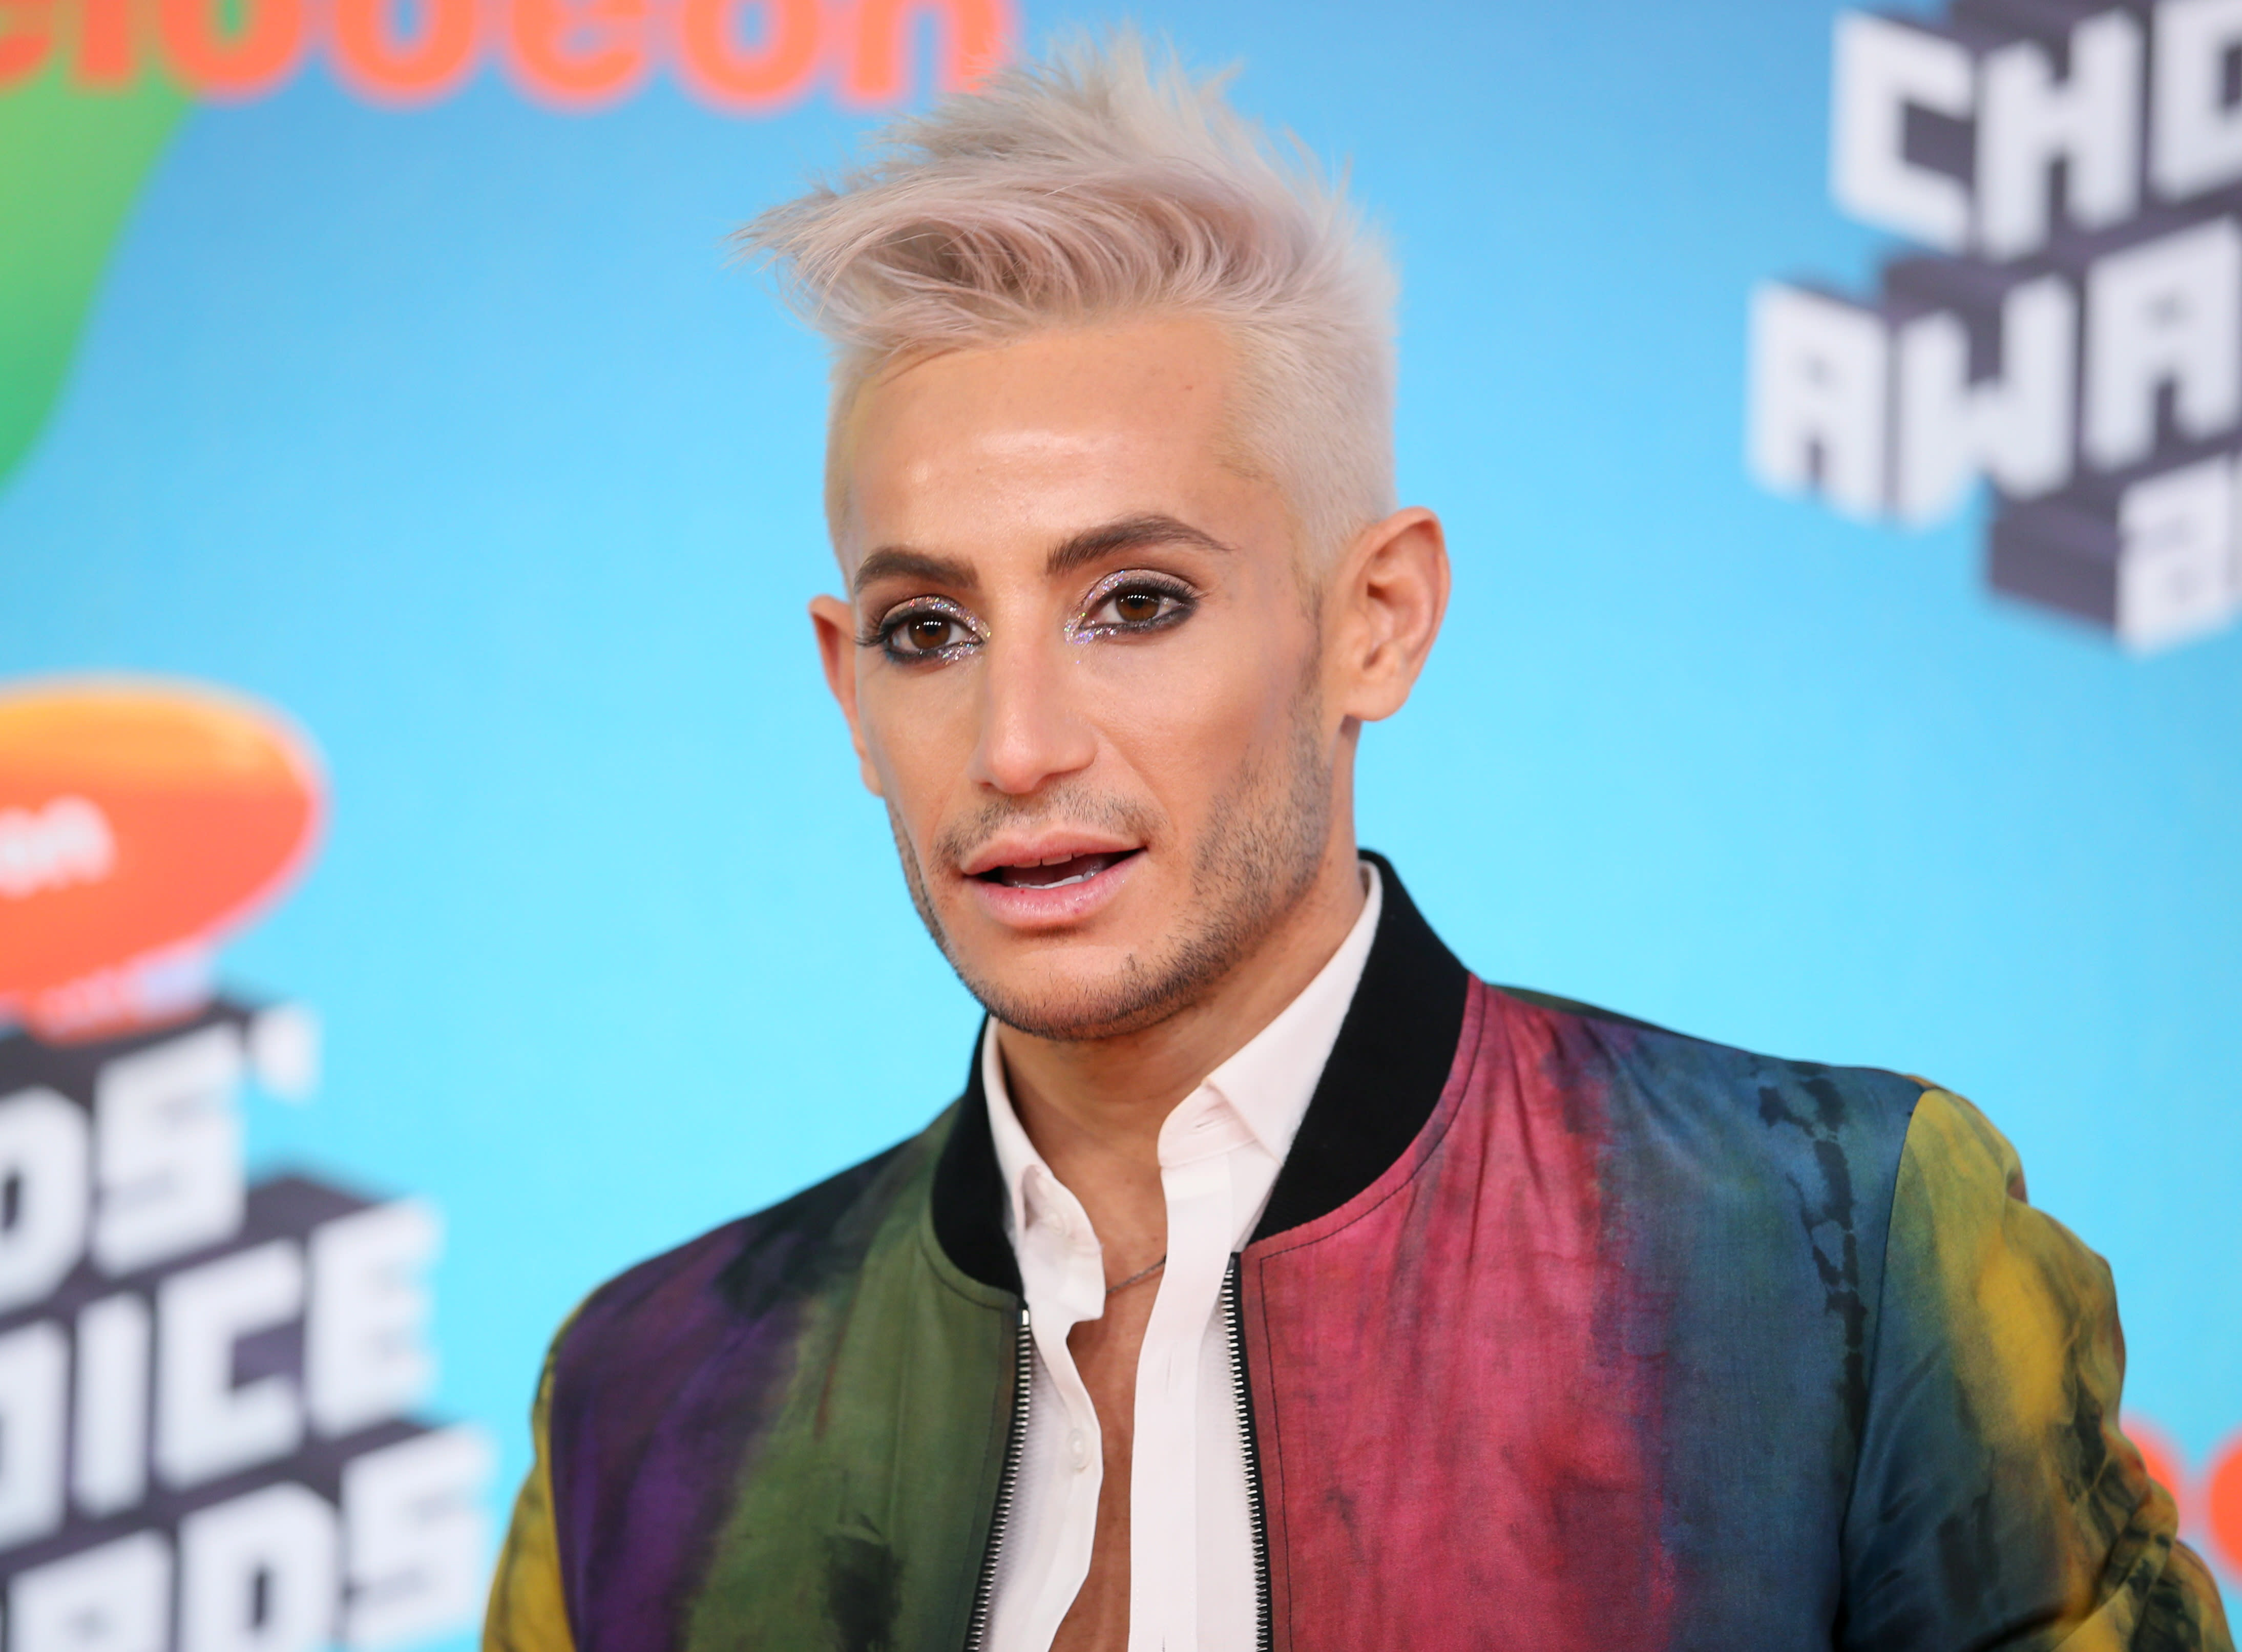 Frankie Grande's Blue Hair Is the Most Extra Thing You'll See Today - wide 9